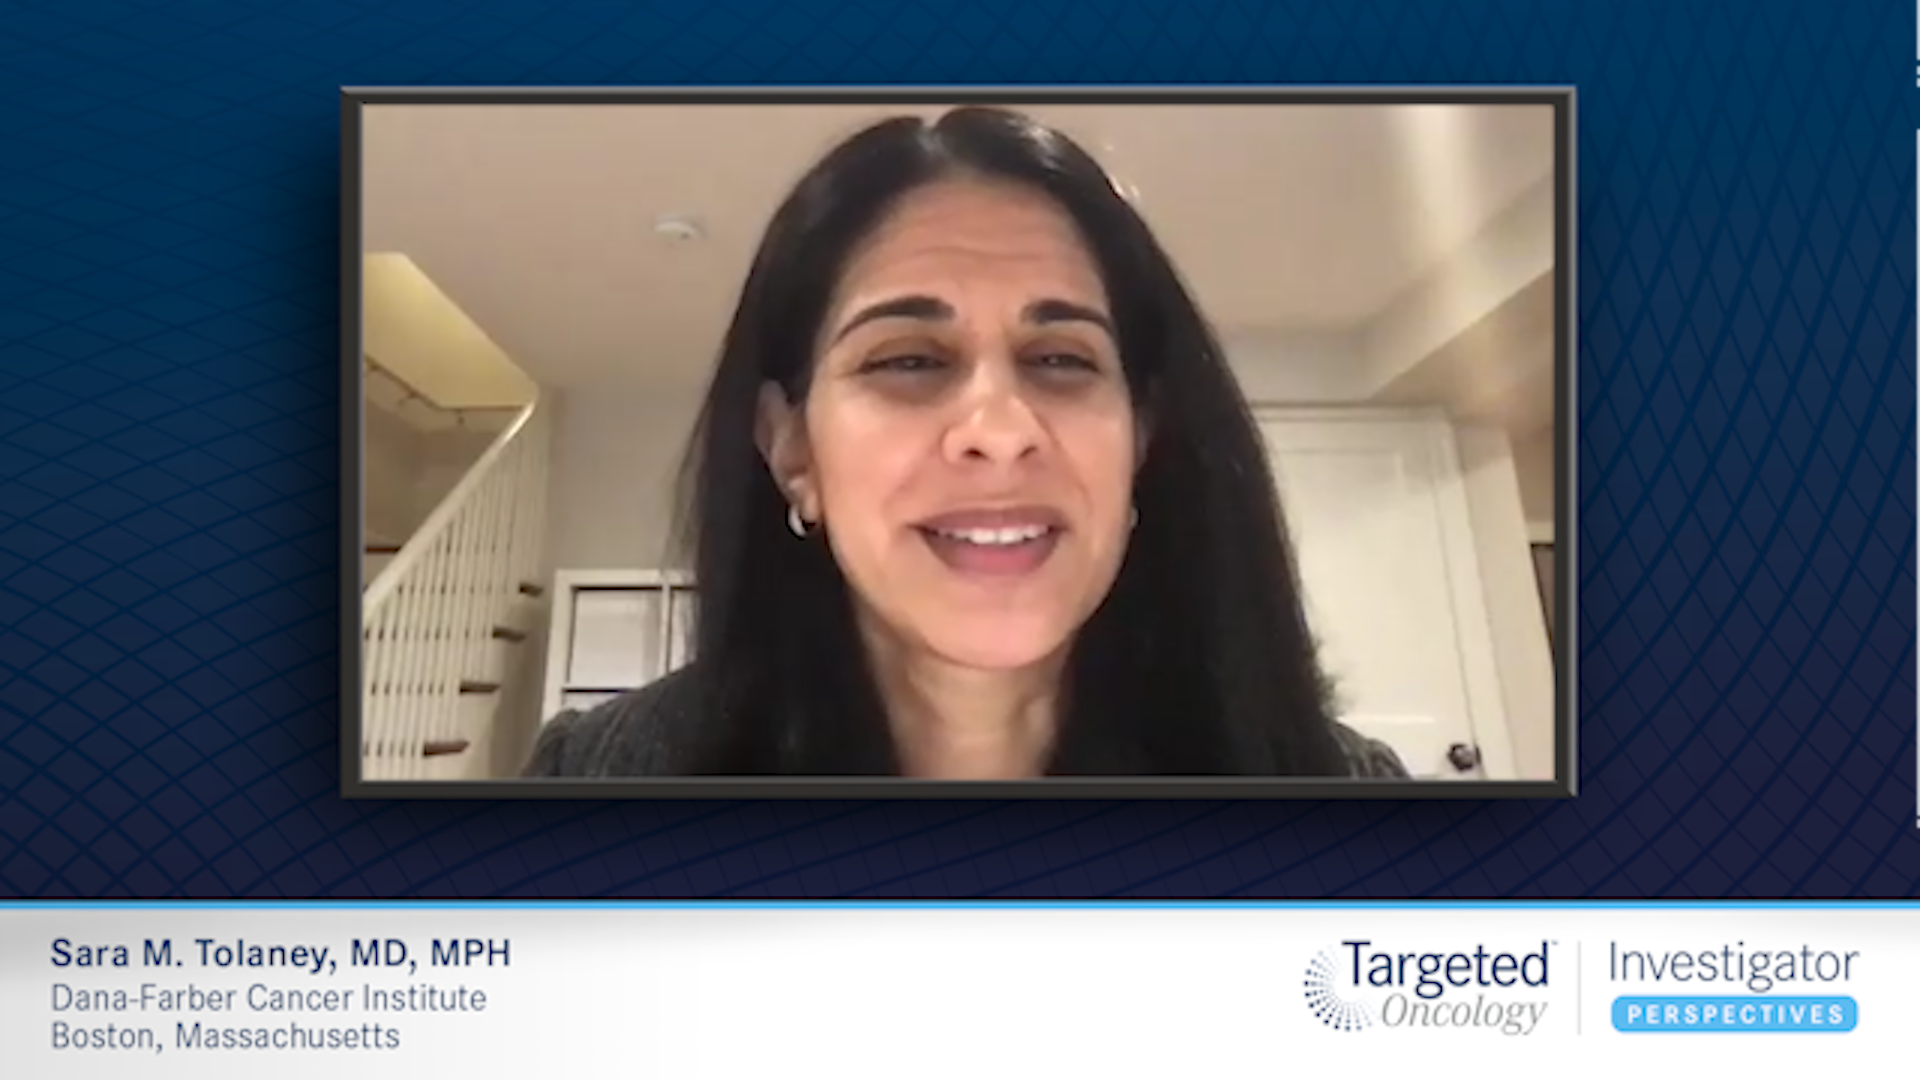 Update on HER2-Targeted Therapy in Early Breast Cancer